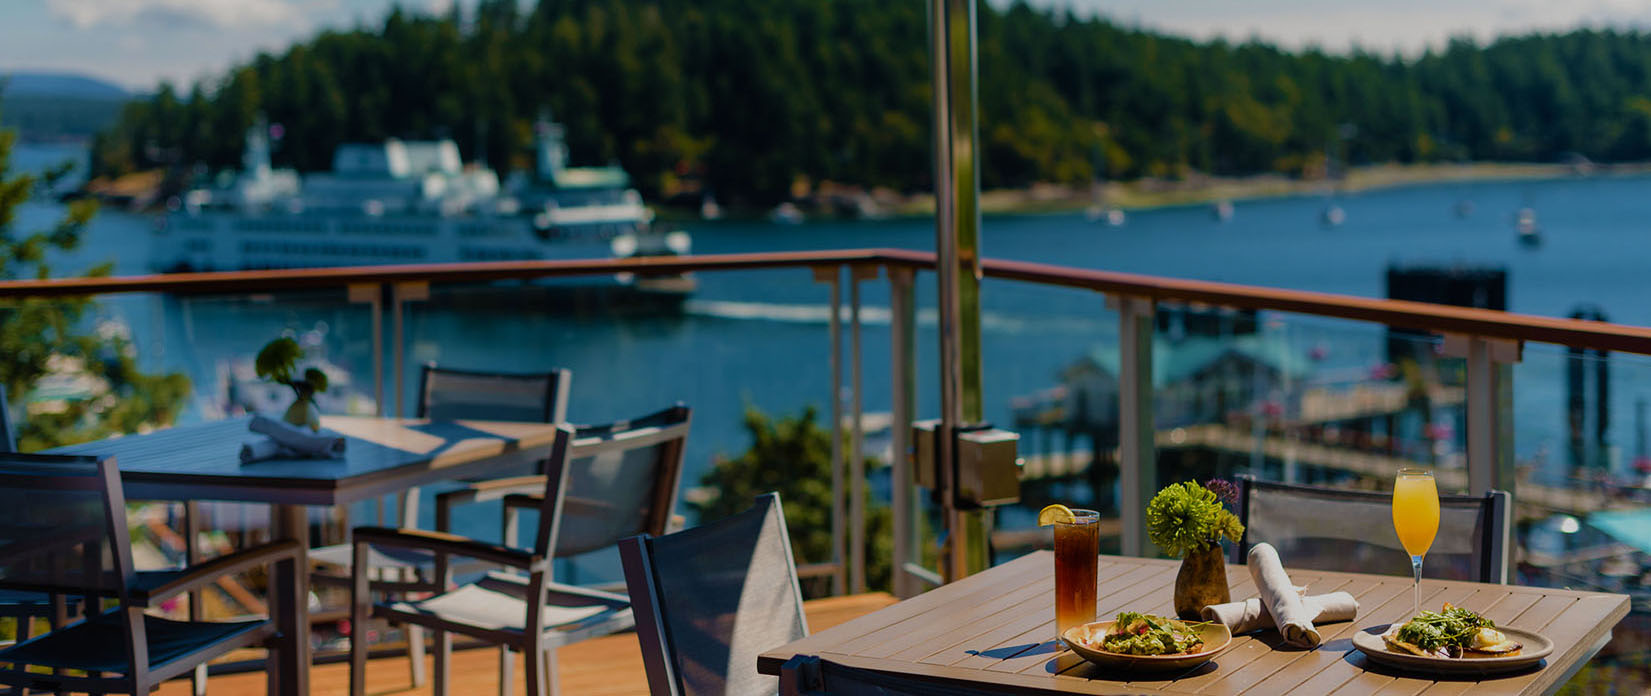 outdoor dining with a ferry view